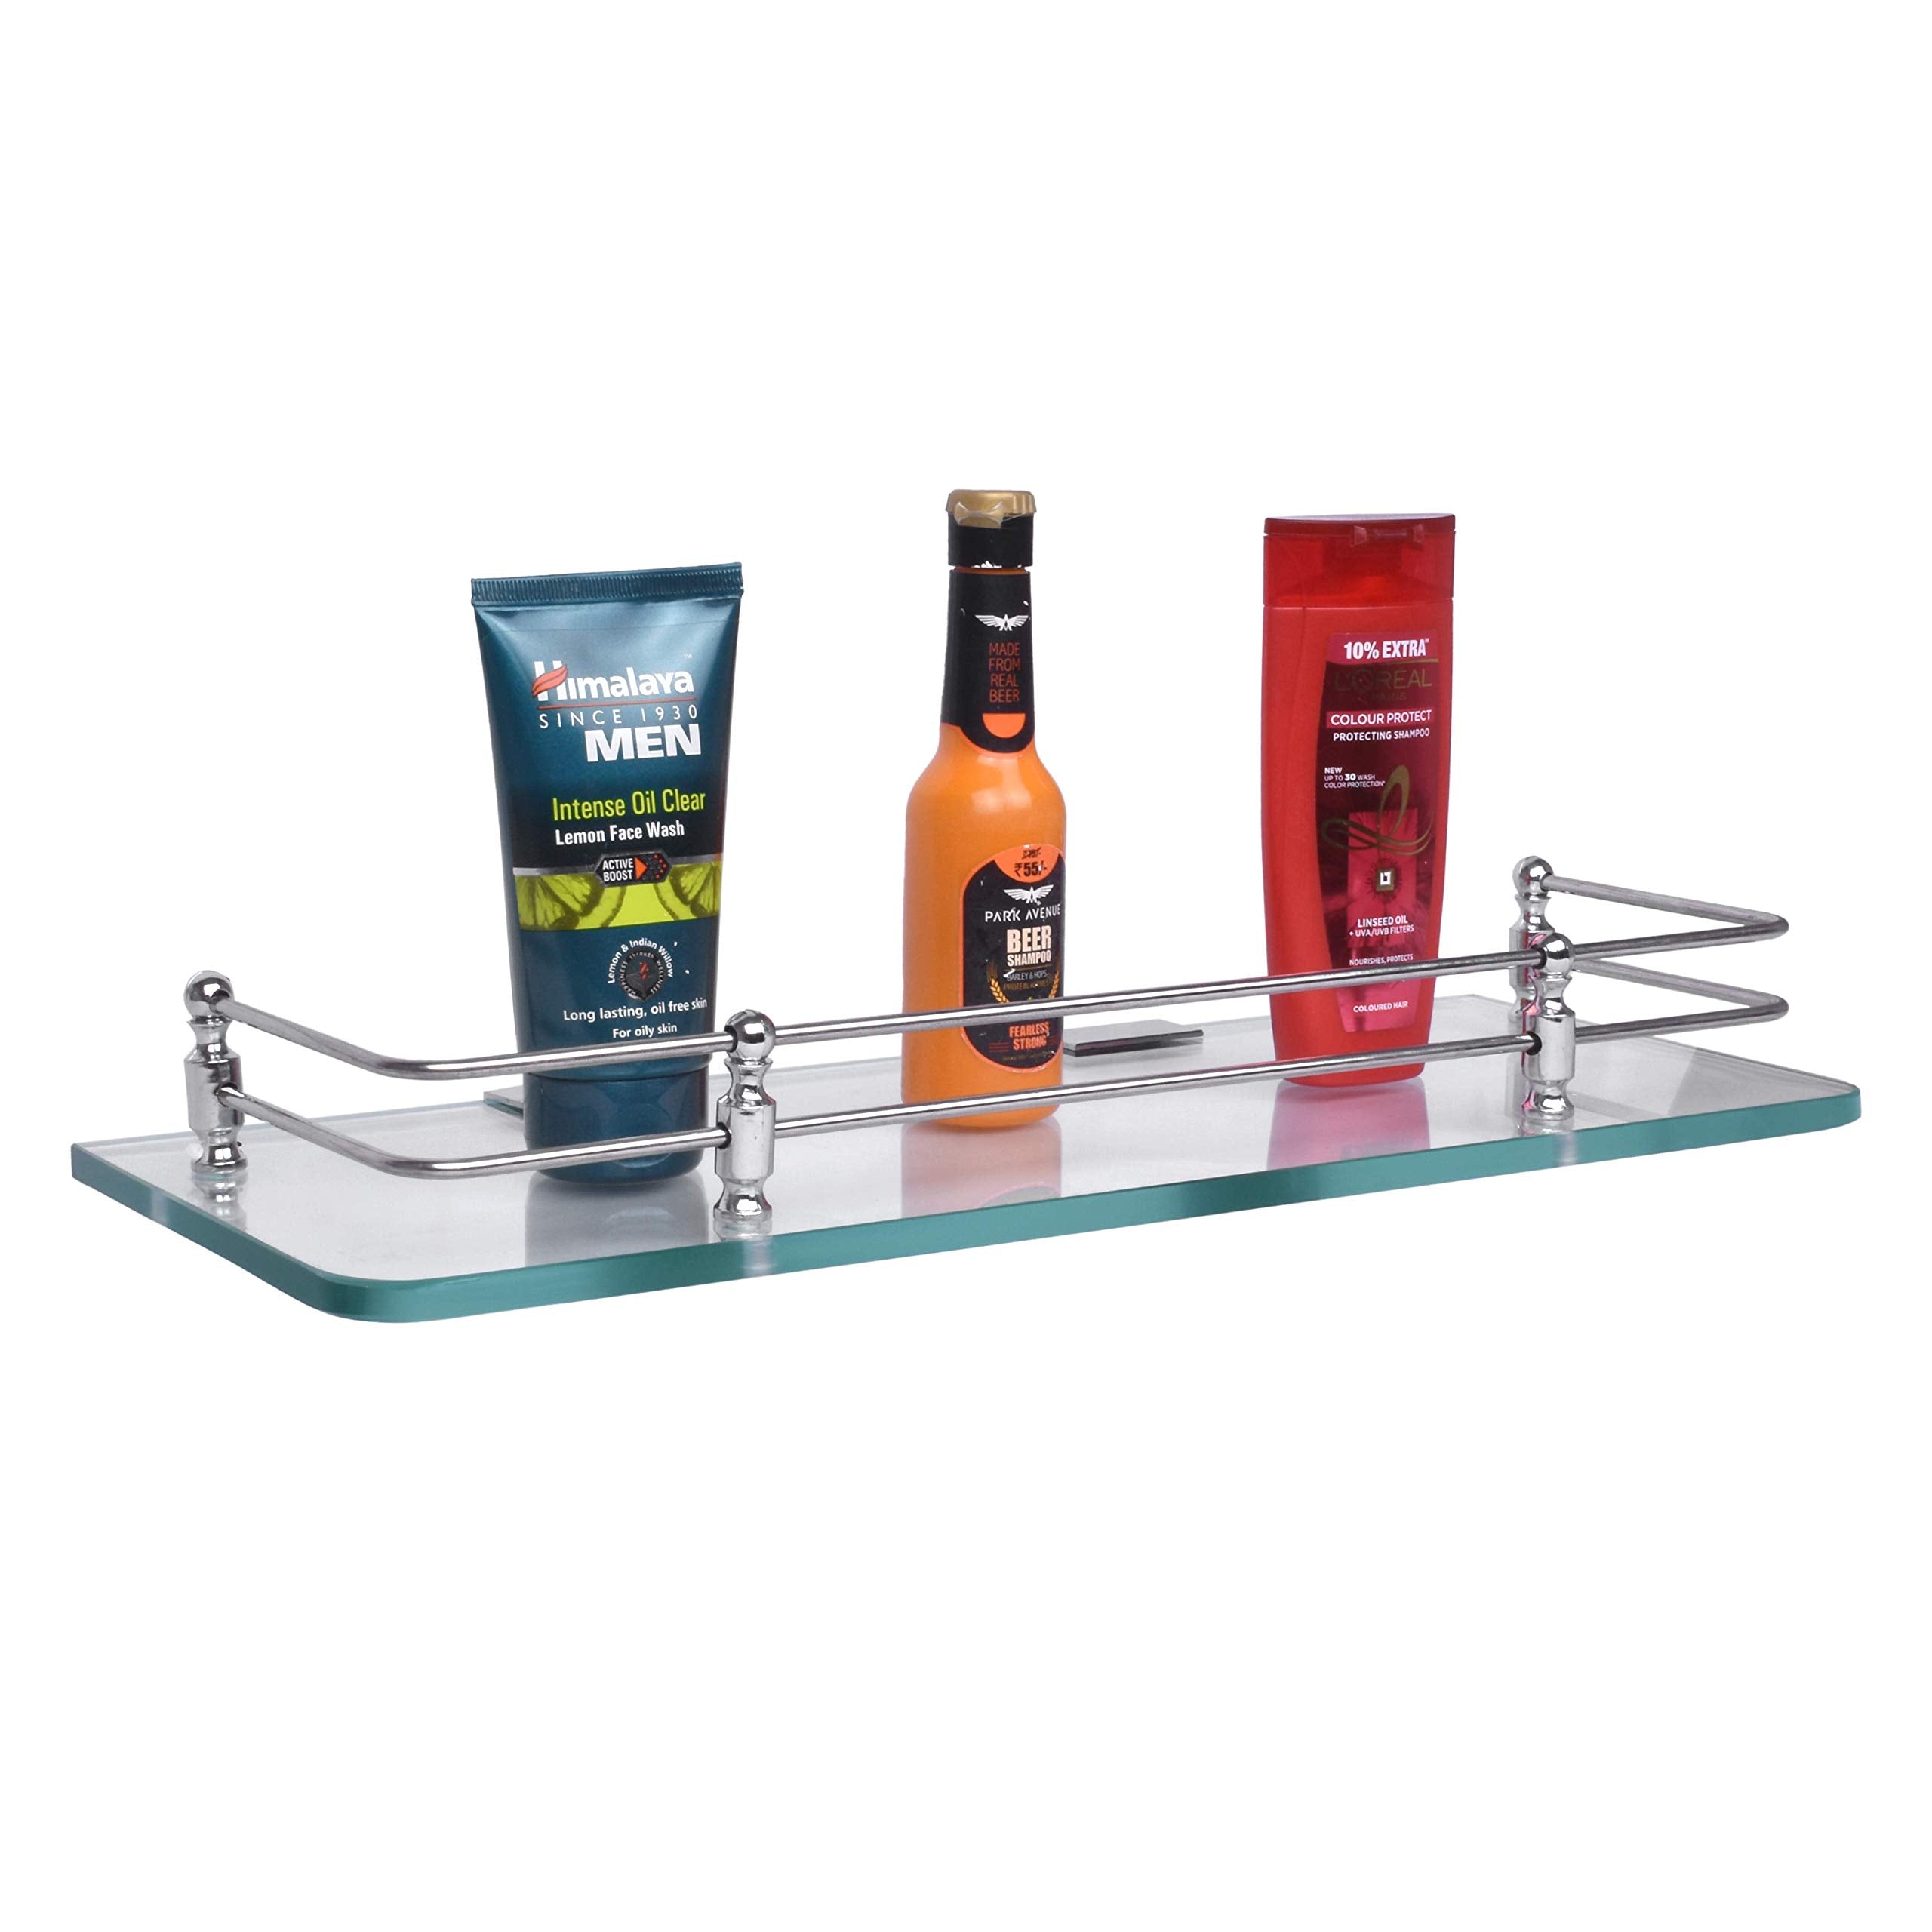 Plantex Premium Transparent Glass Shelf for Bathroom/Kitchen/Living Room - Bathroom Accessories (Polished, 18x6 Inches) - Pack of 2